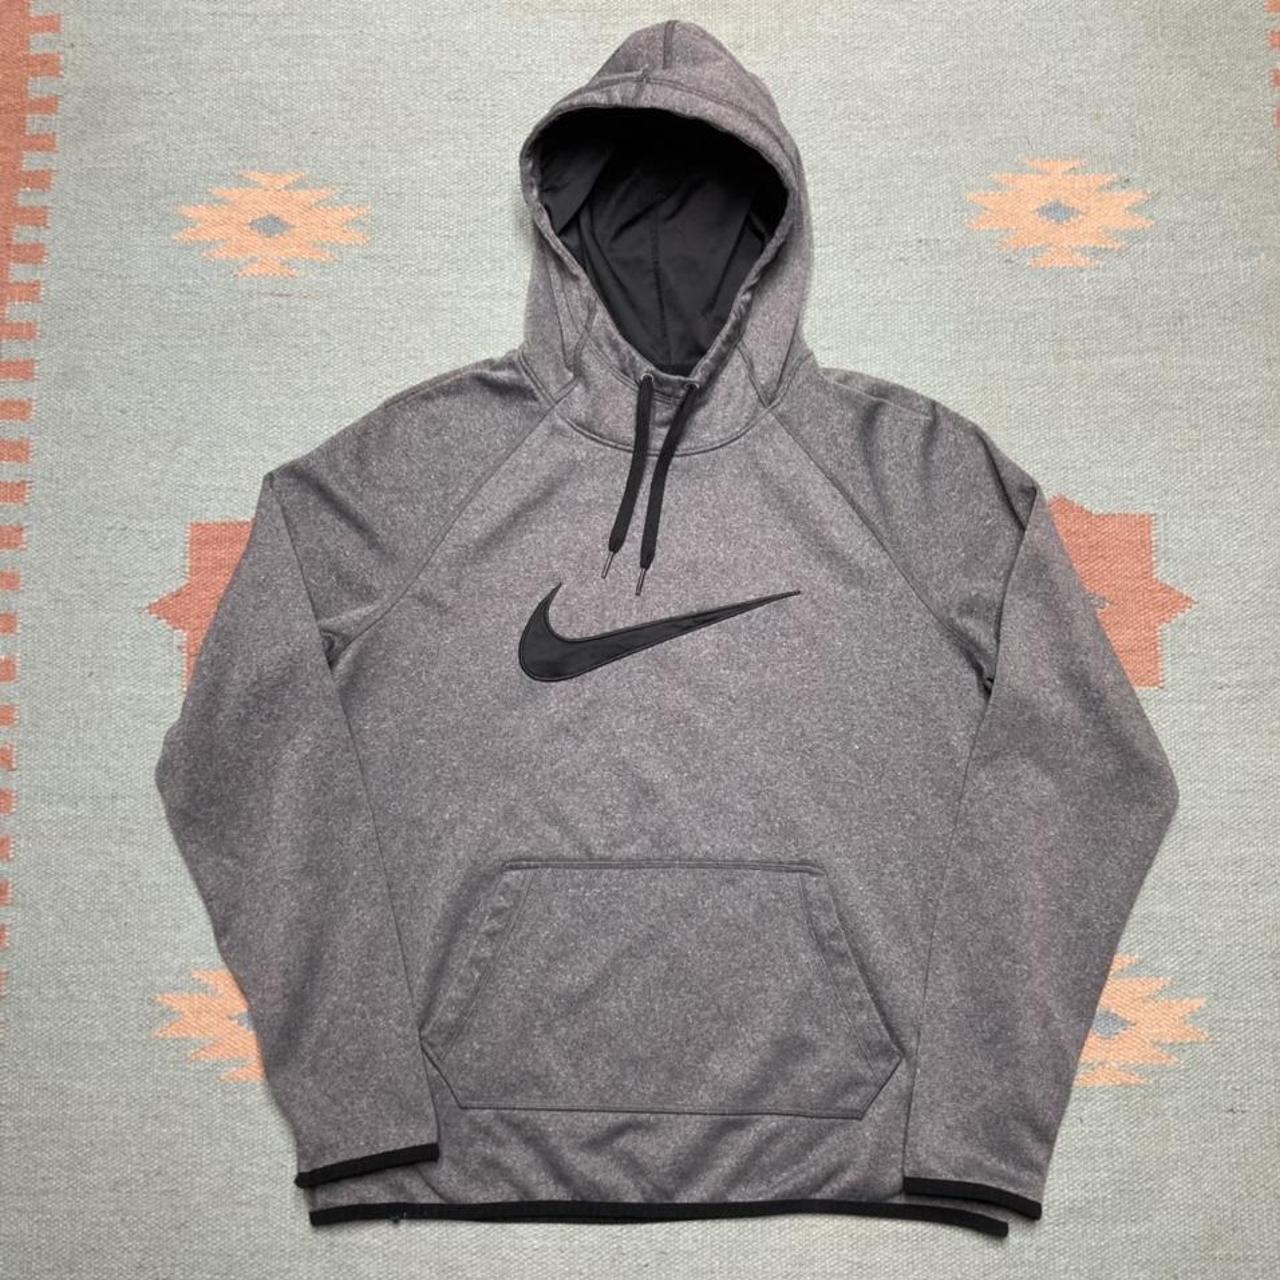 Nike dri fit pullover hoodie swoosh embroidered gray - Depop